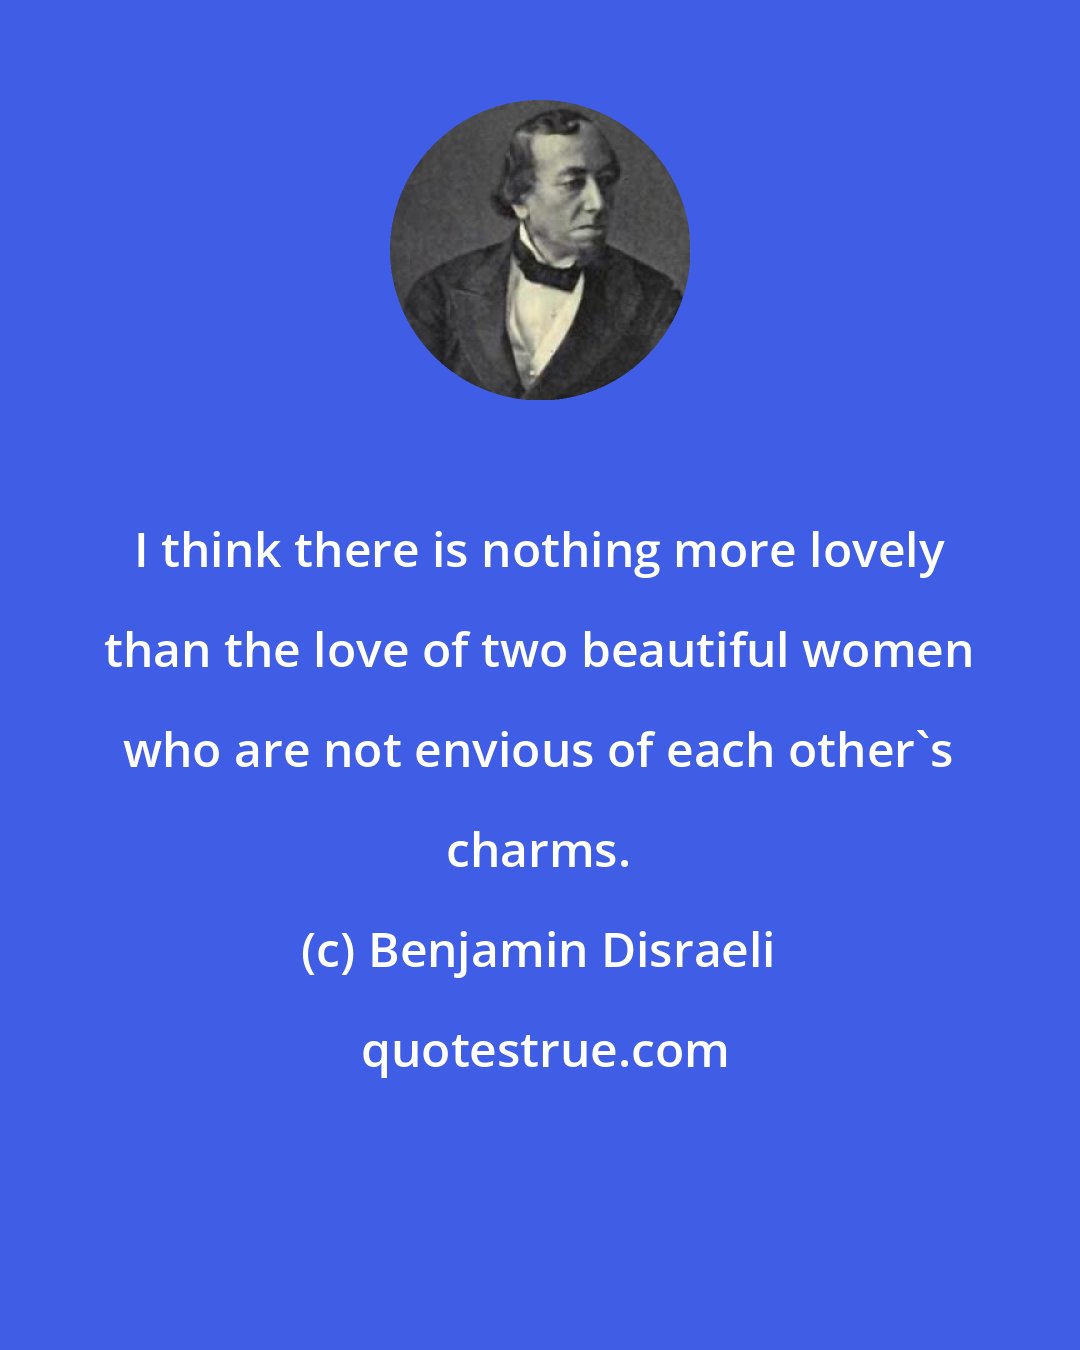 Benjamin Disraeli: I think there is nothing more lovely than the love of two beautiful women who are not envious of each other's charms.